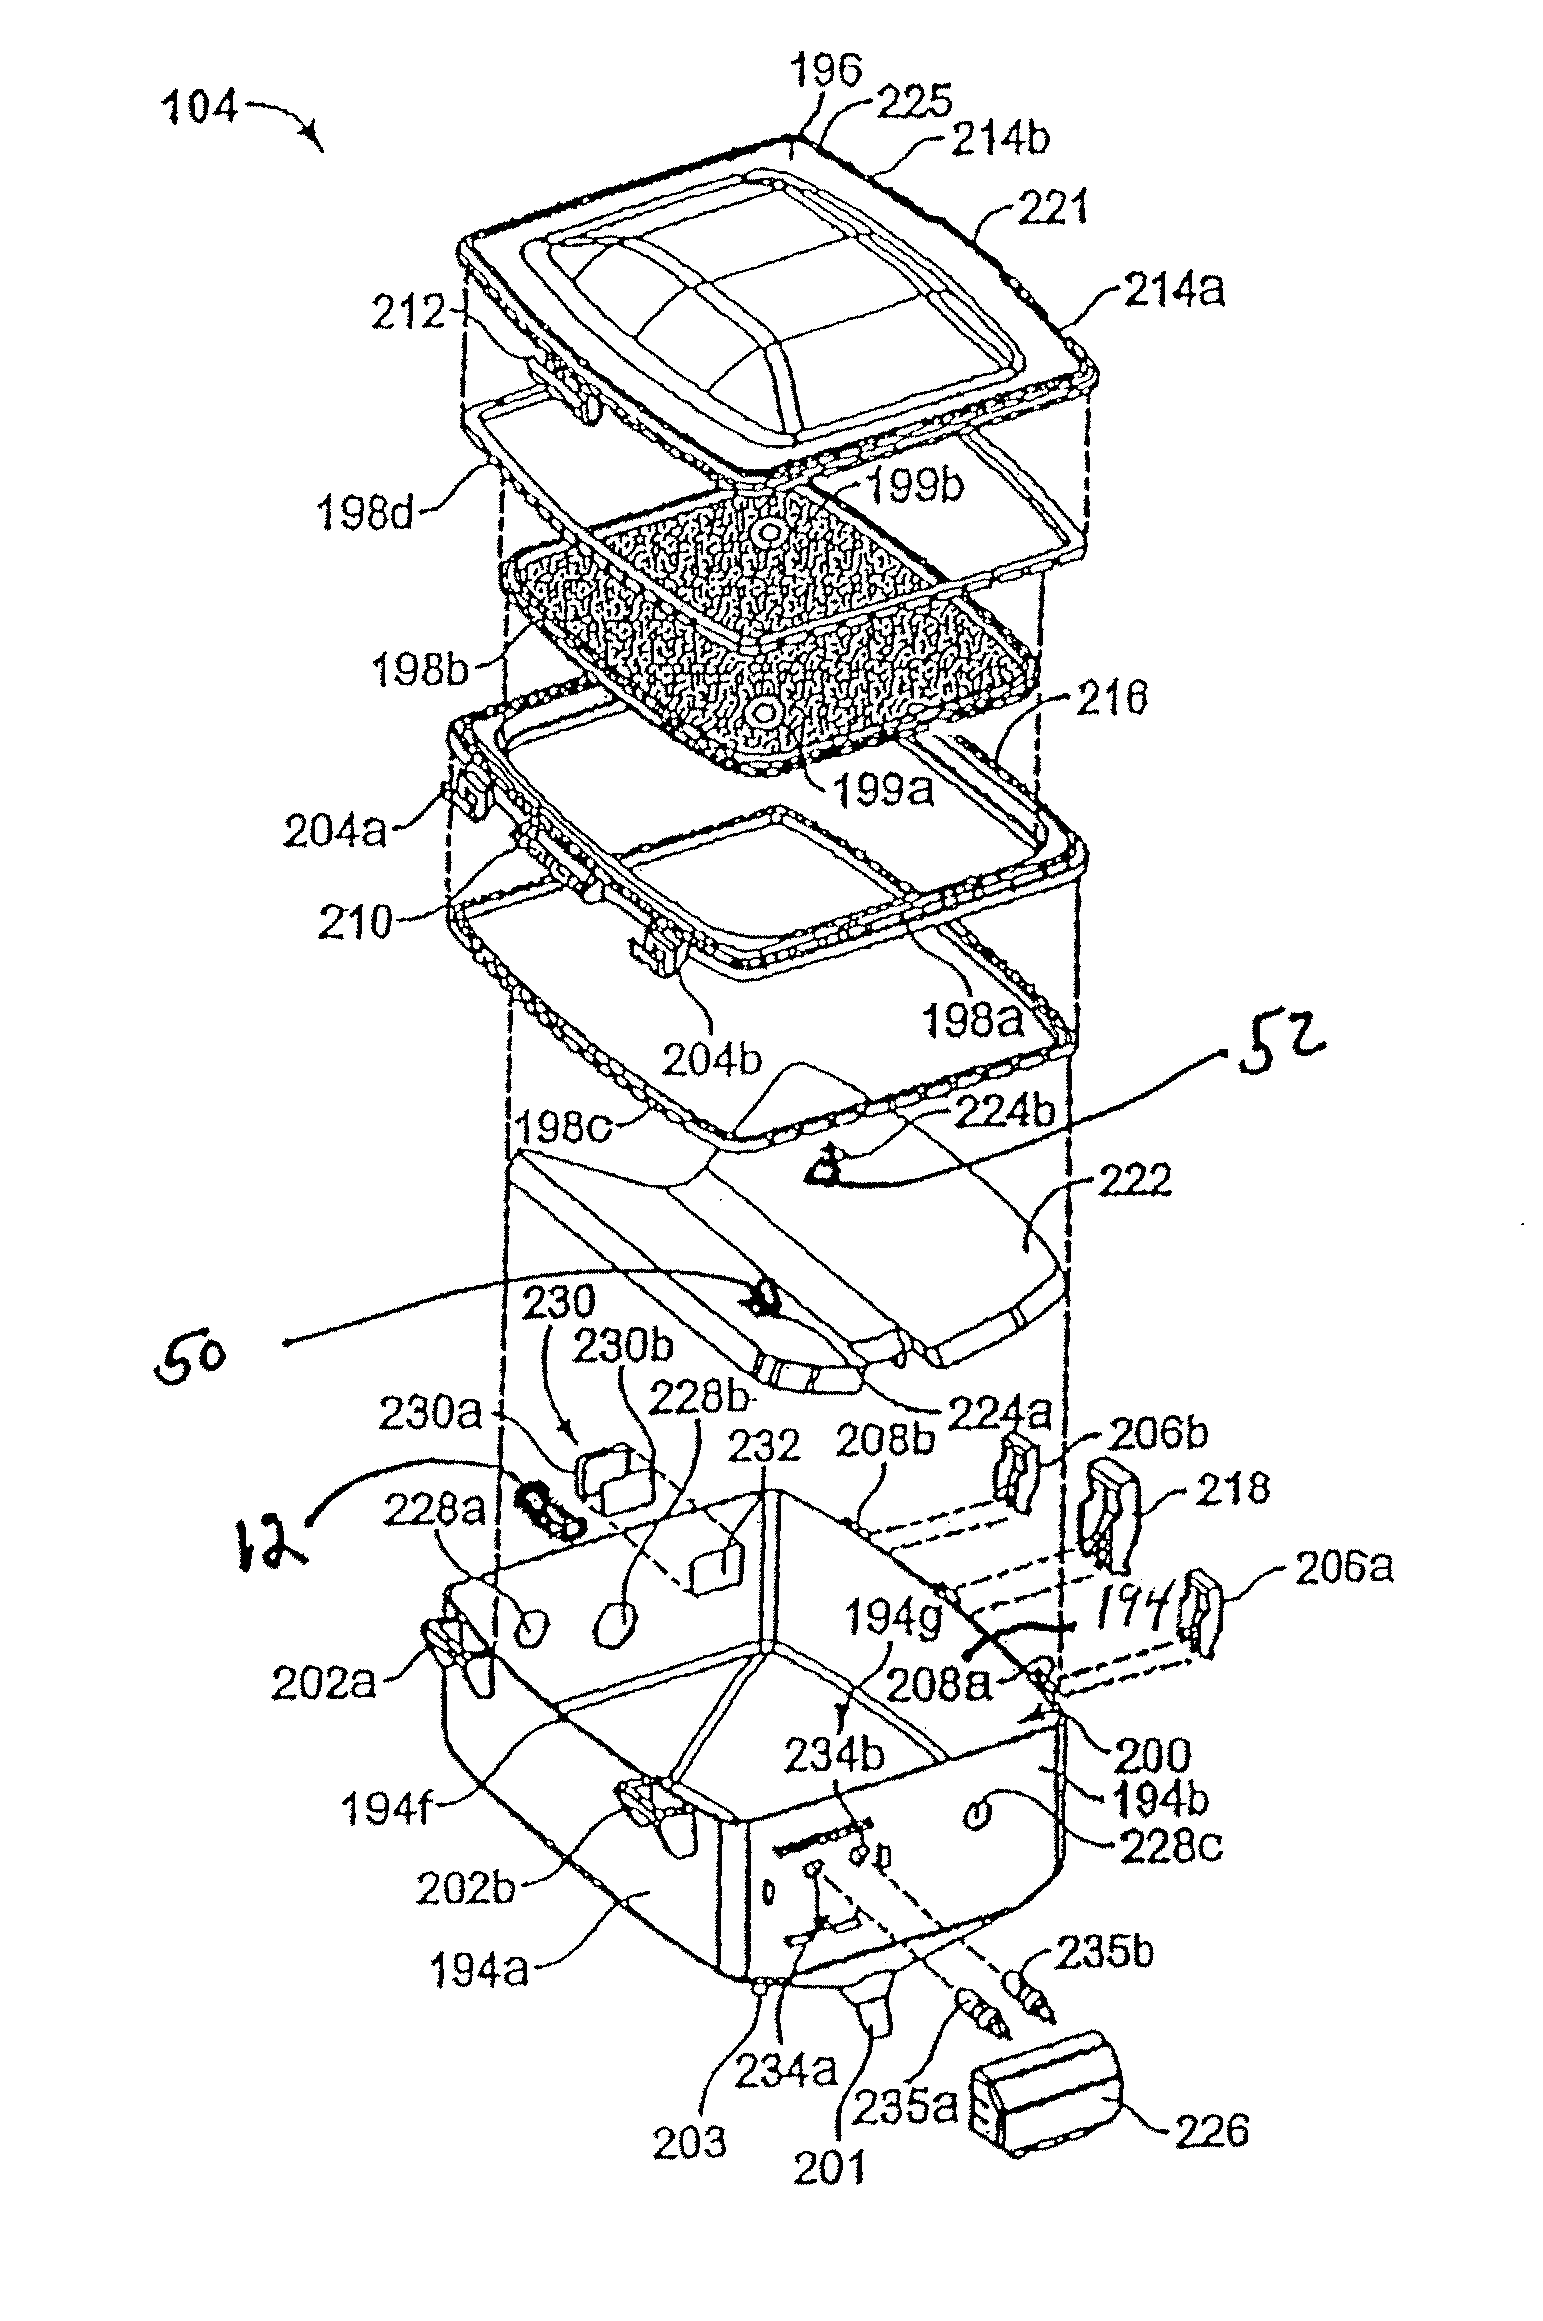 Systems for monitoring and applying electrical currents in an organ perfusion system